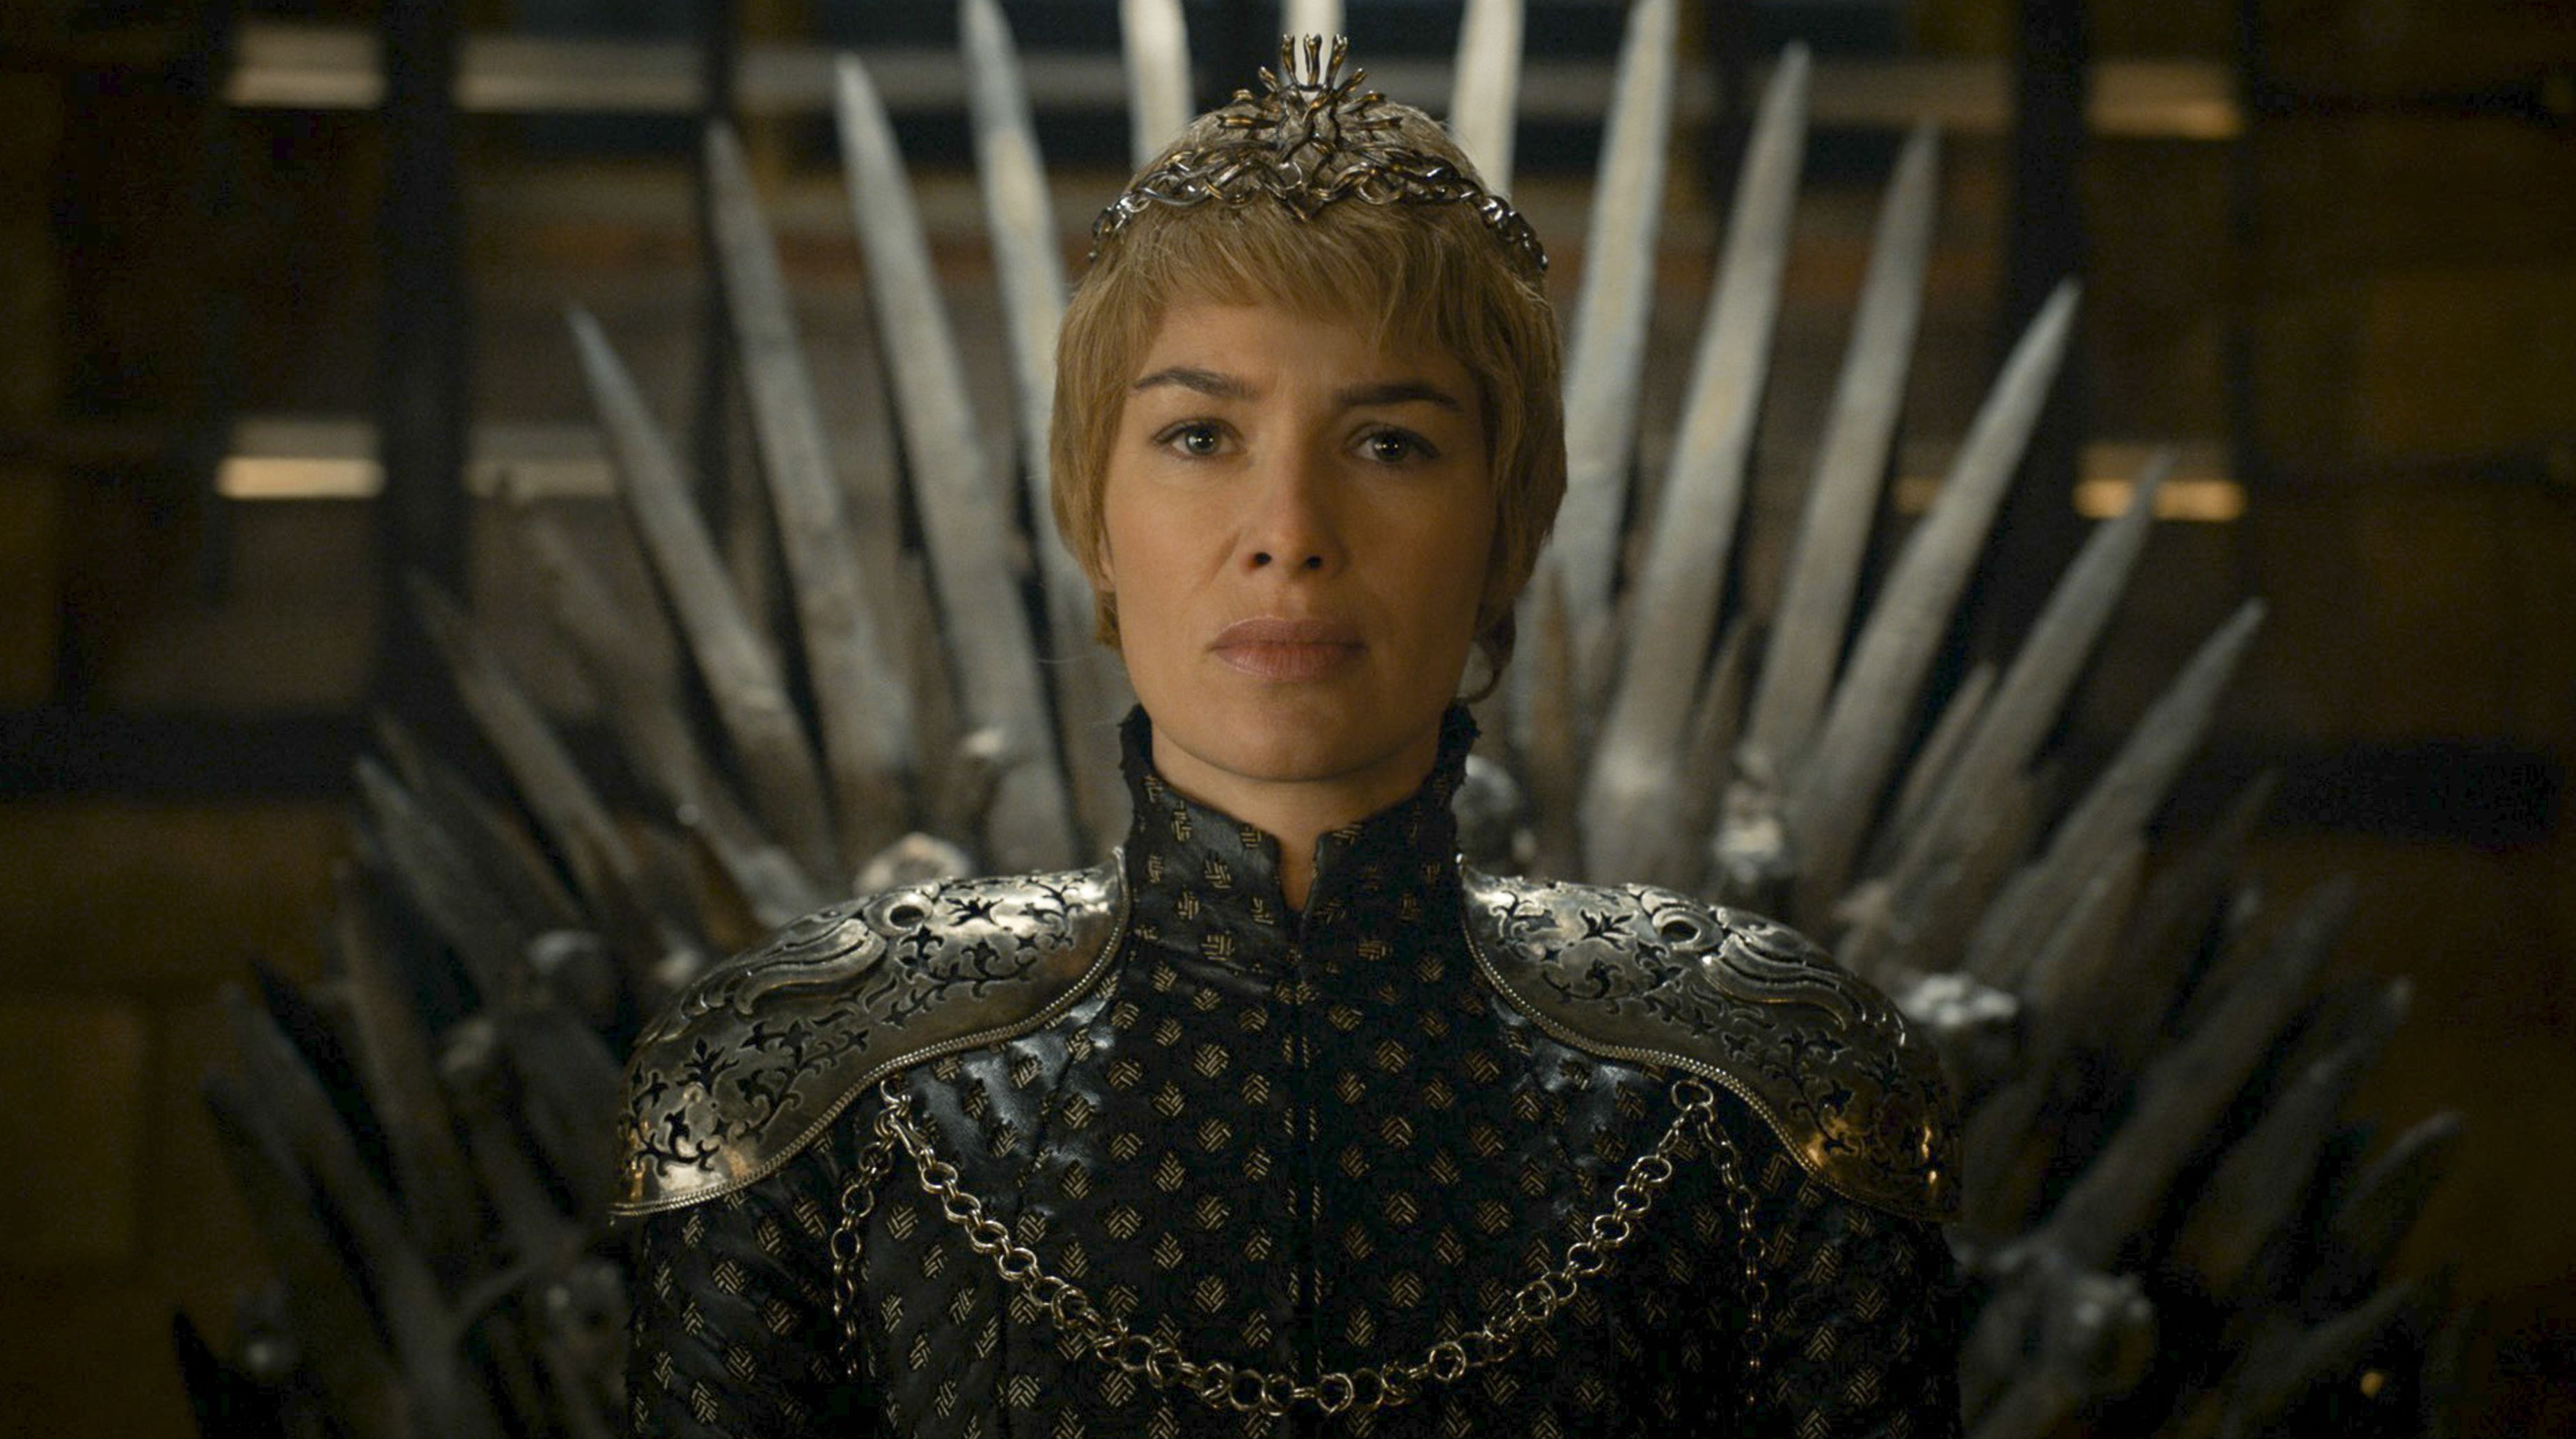 Cersei Lannister on the Iron Throne, S6E10